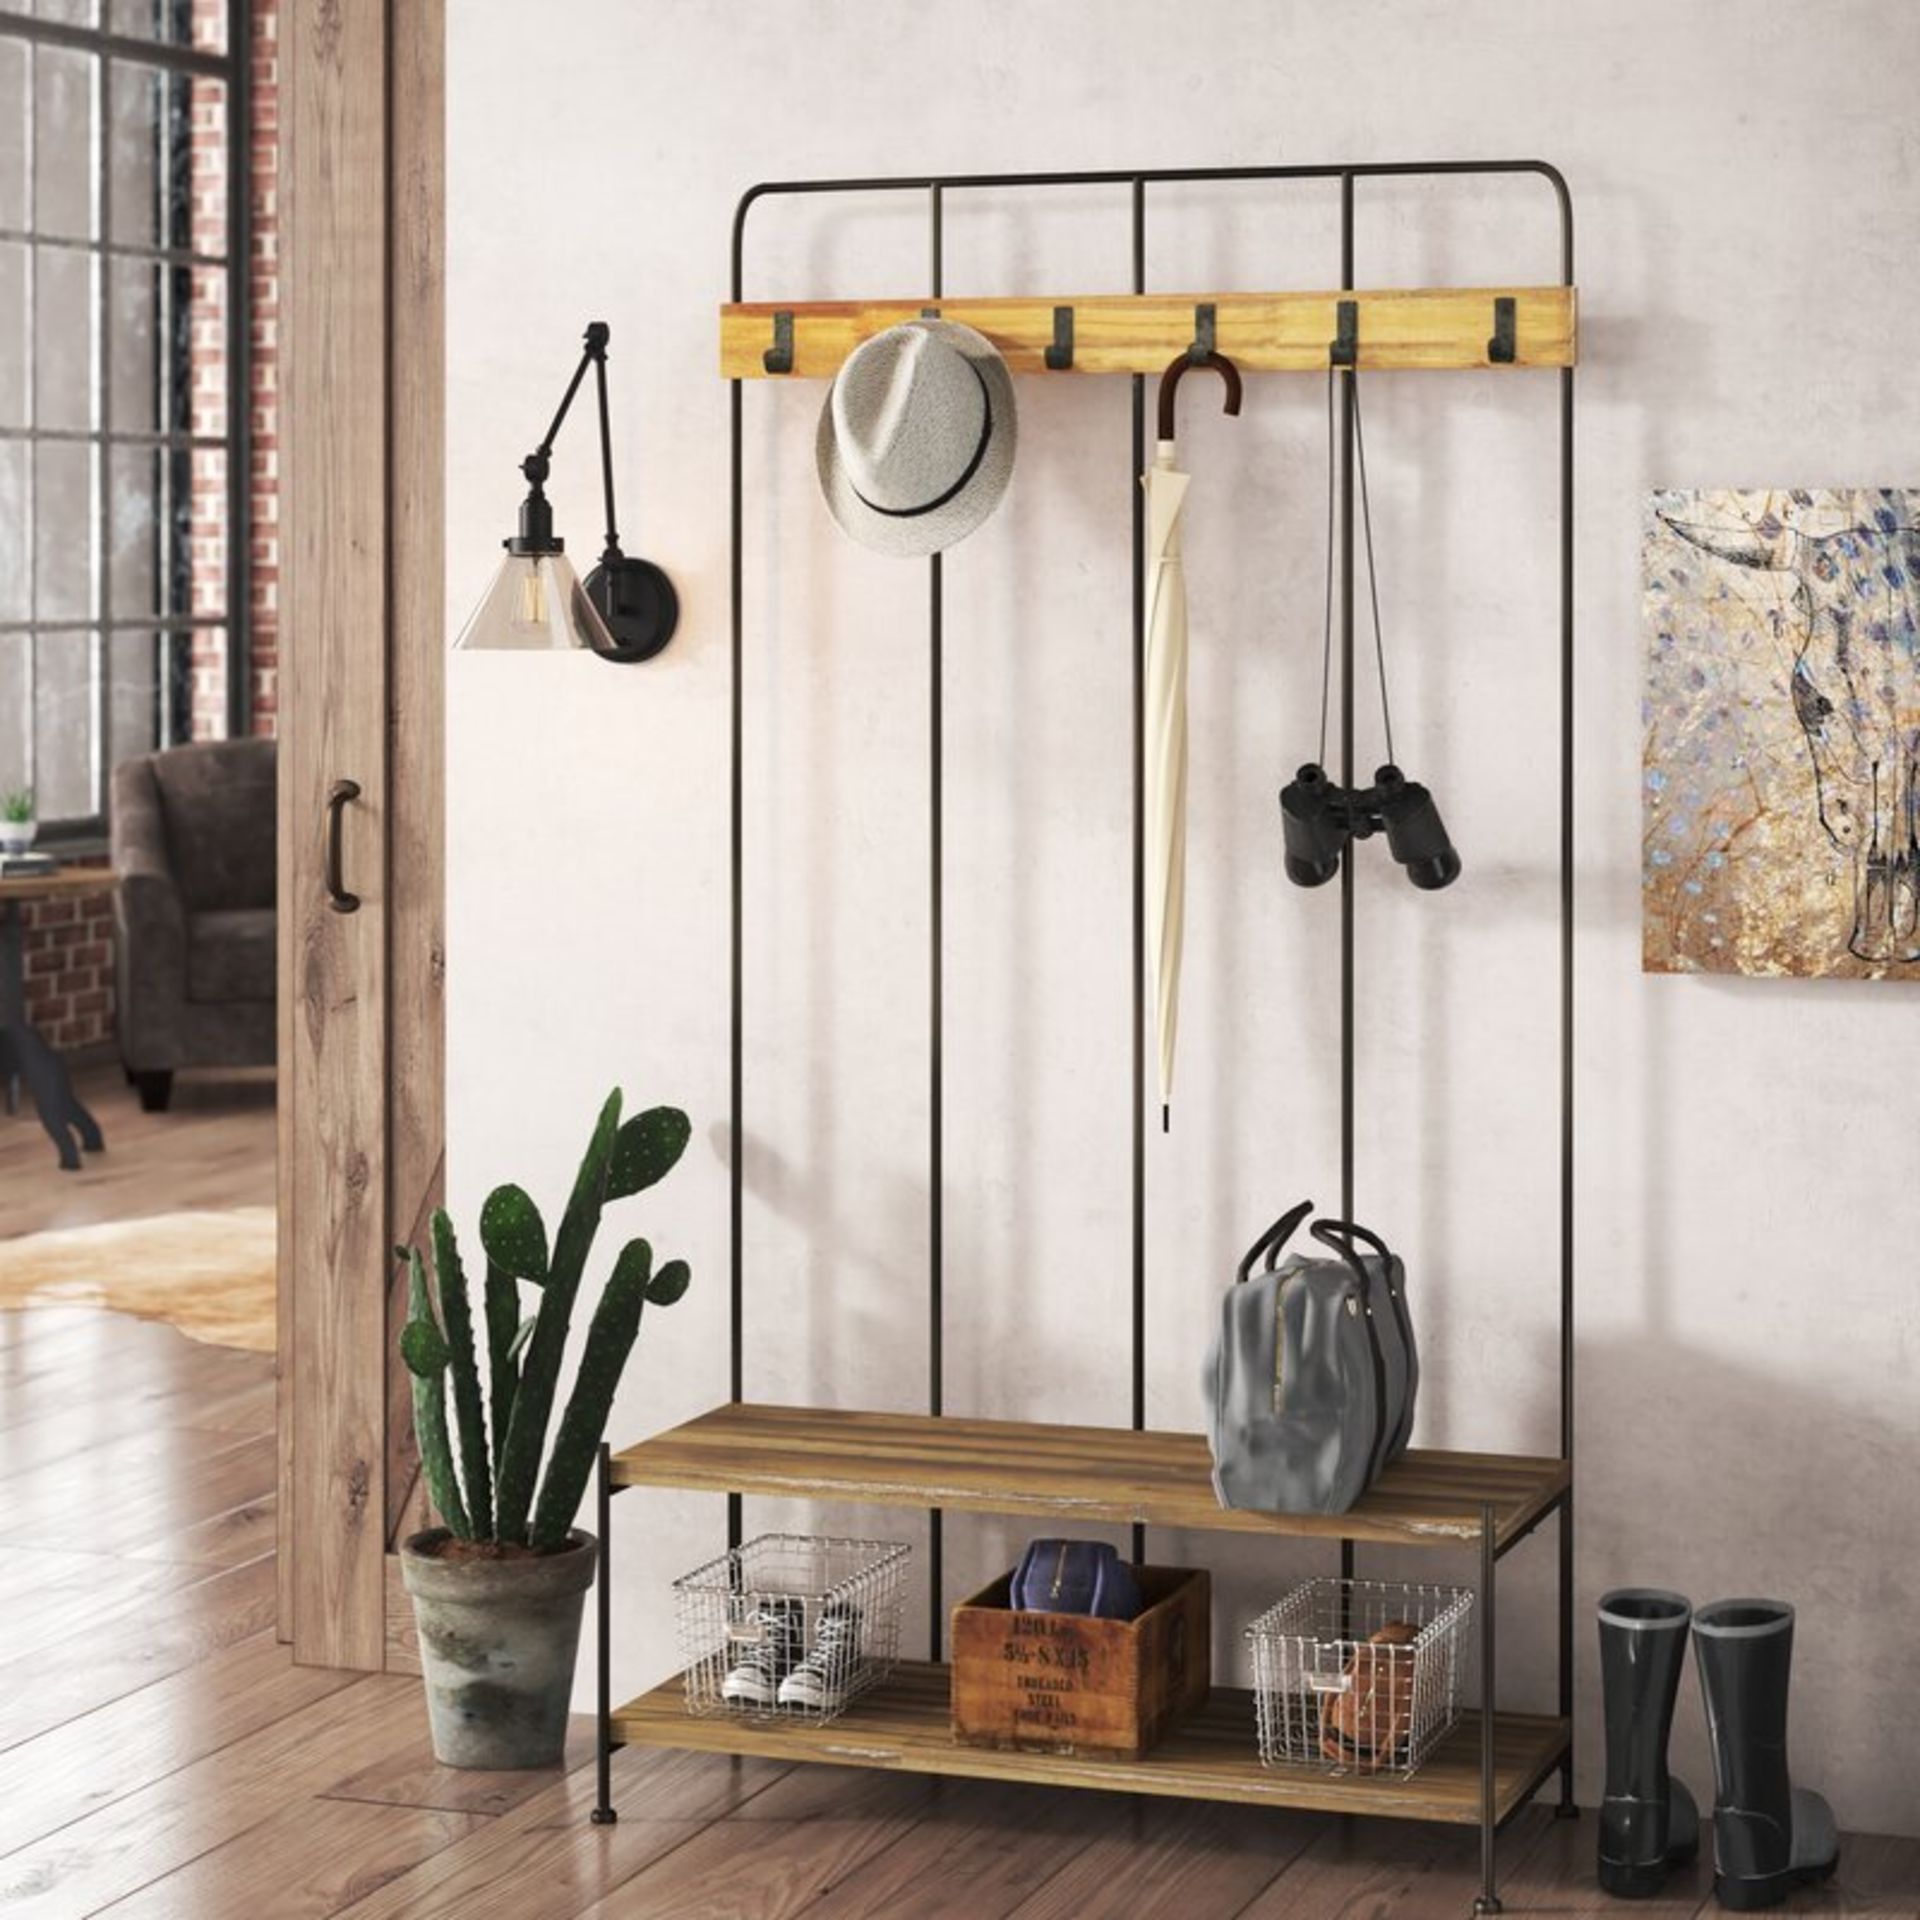 1 x GIRO Industrial-style Coat Rack In Wood And Metal - Brand New - CL508 - Ref: 501 / B1 - RRP £205 - Image 5 of 5